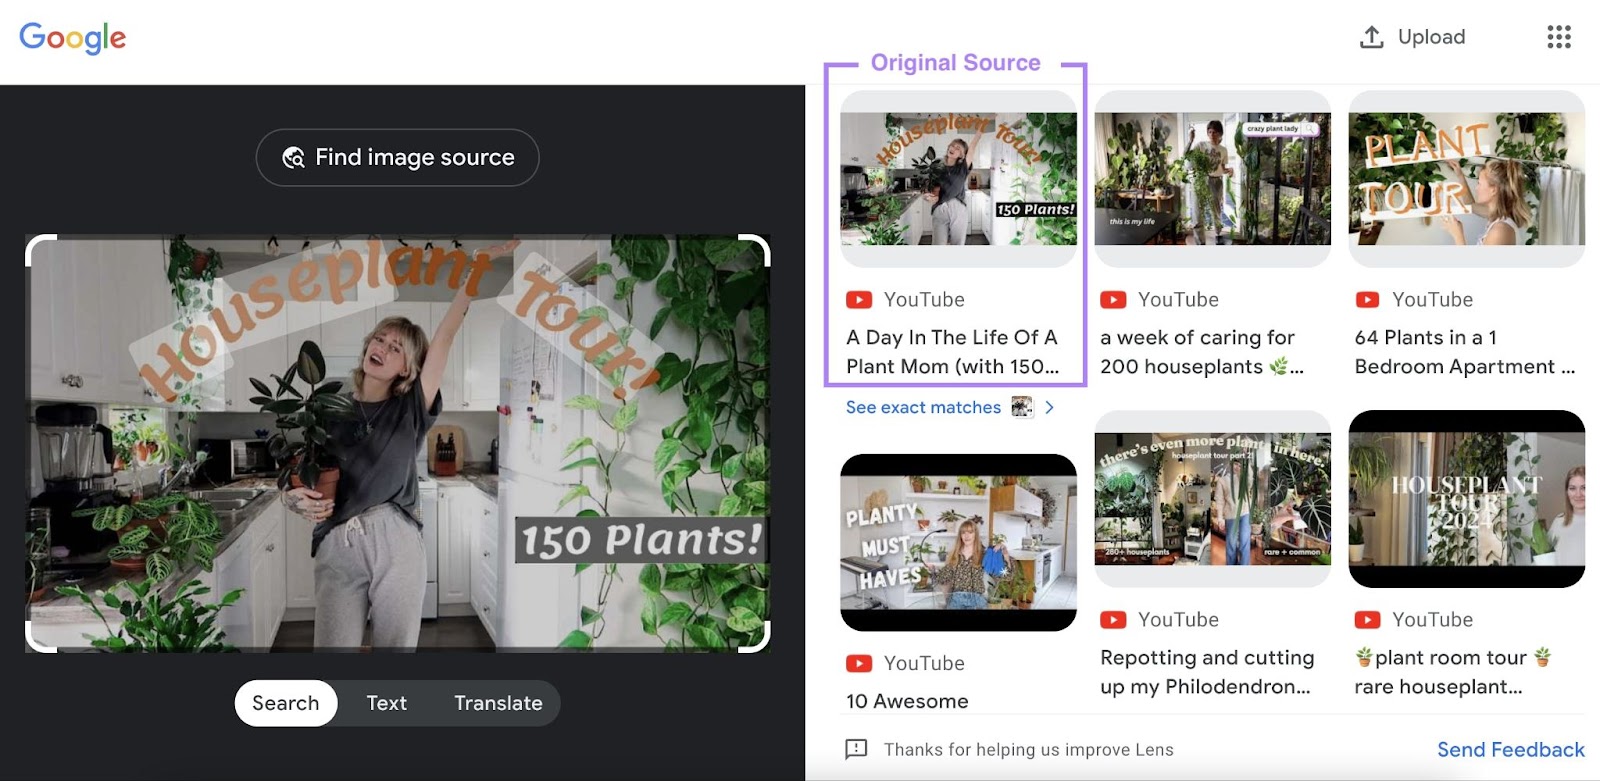 Google lens search results showing original source thumbnail images for a houseplant tour YouTube video